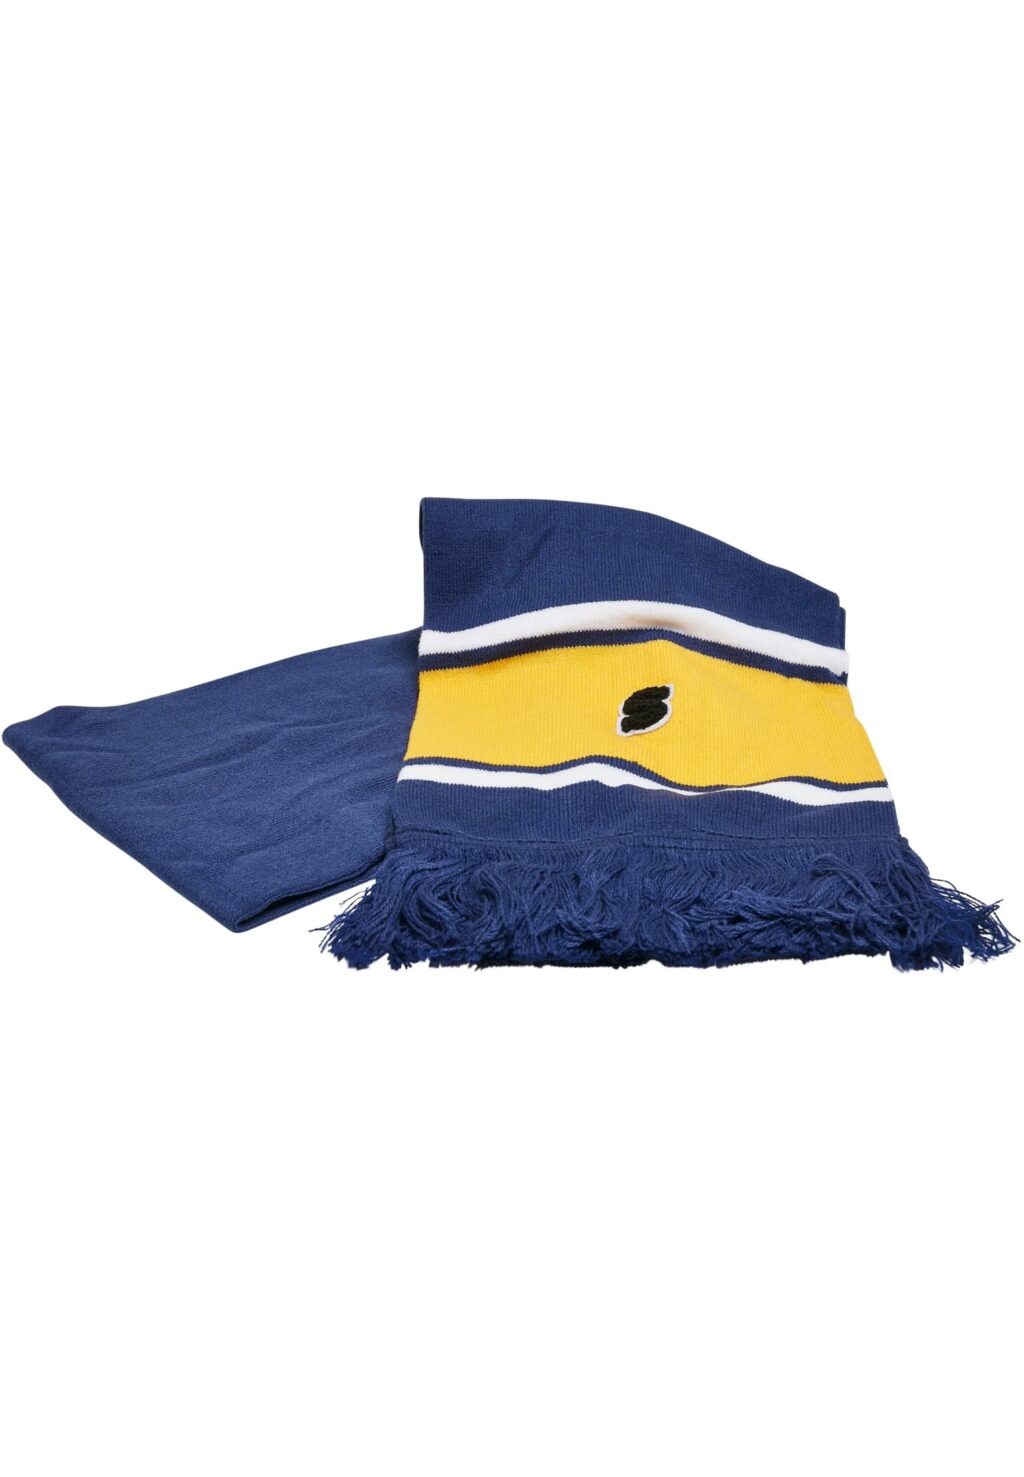 College Team Package Beanie and Scarf spaceblue/californiayellow/wht one TB5653